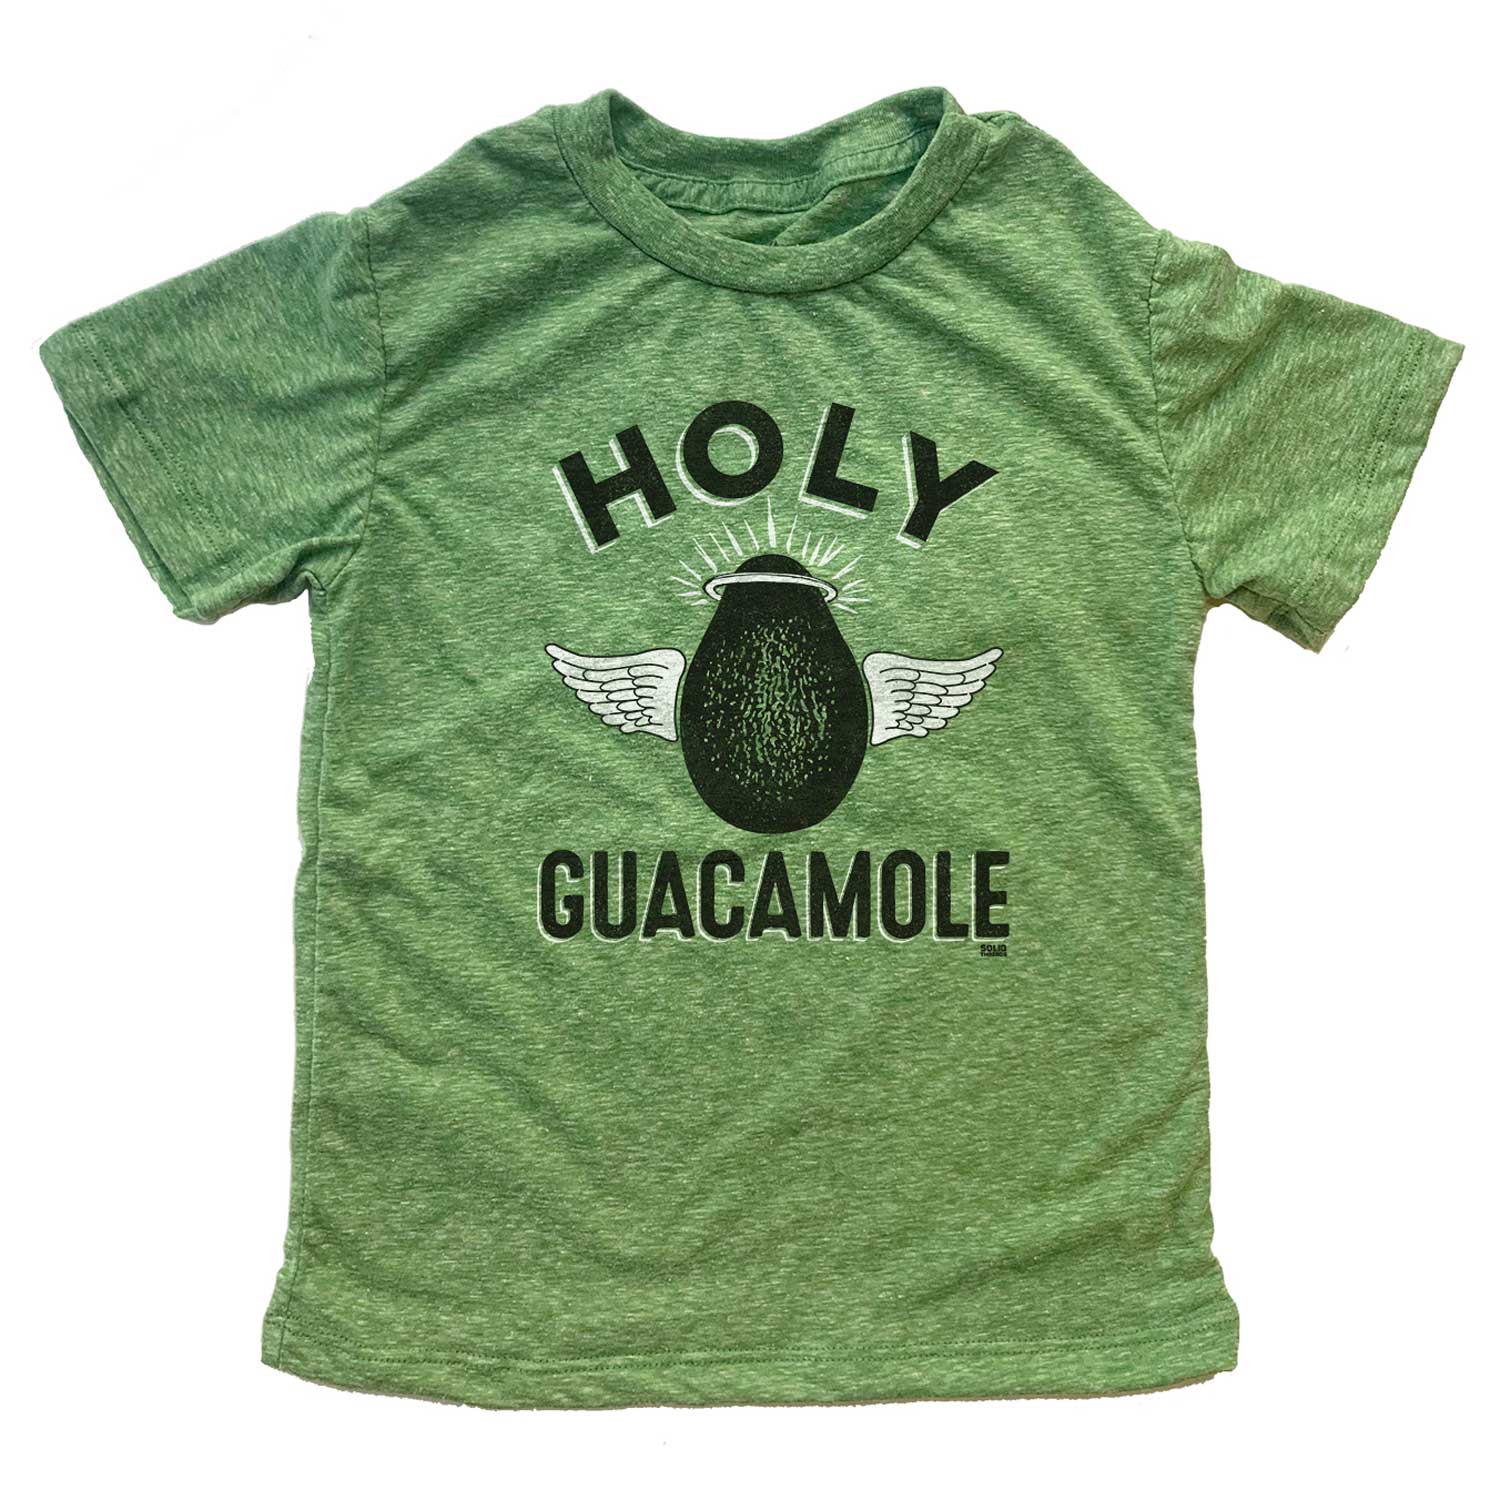 Kid's Holy Guacamole Retro Foodie Graphic Tee | Funny Avocado T-shirt for Youth | Solid Threads